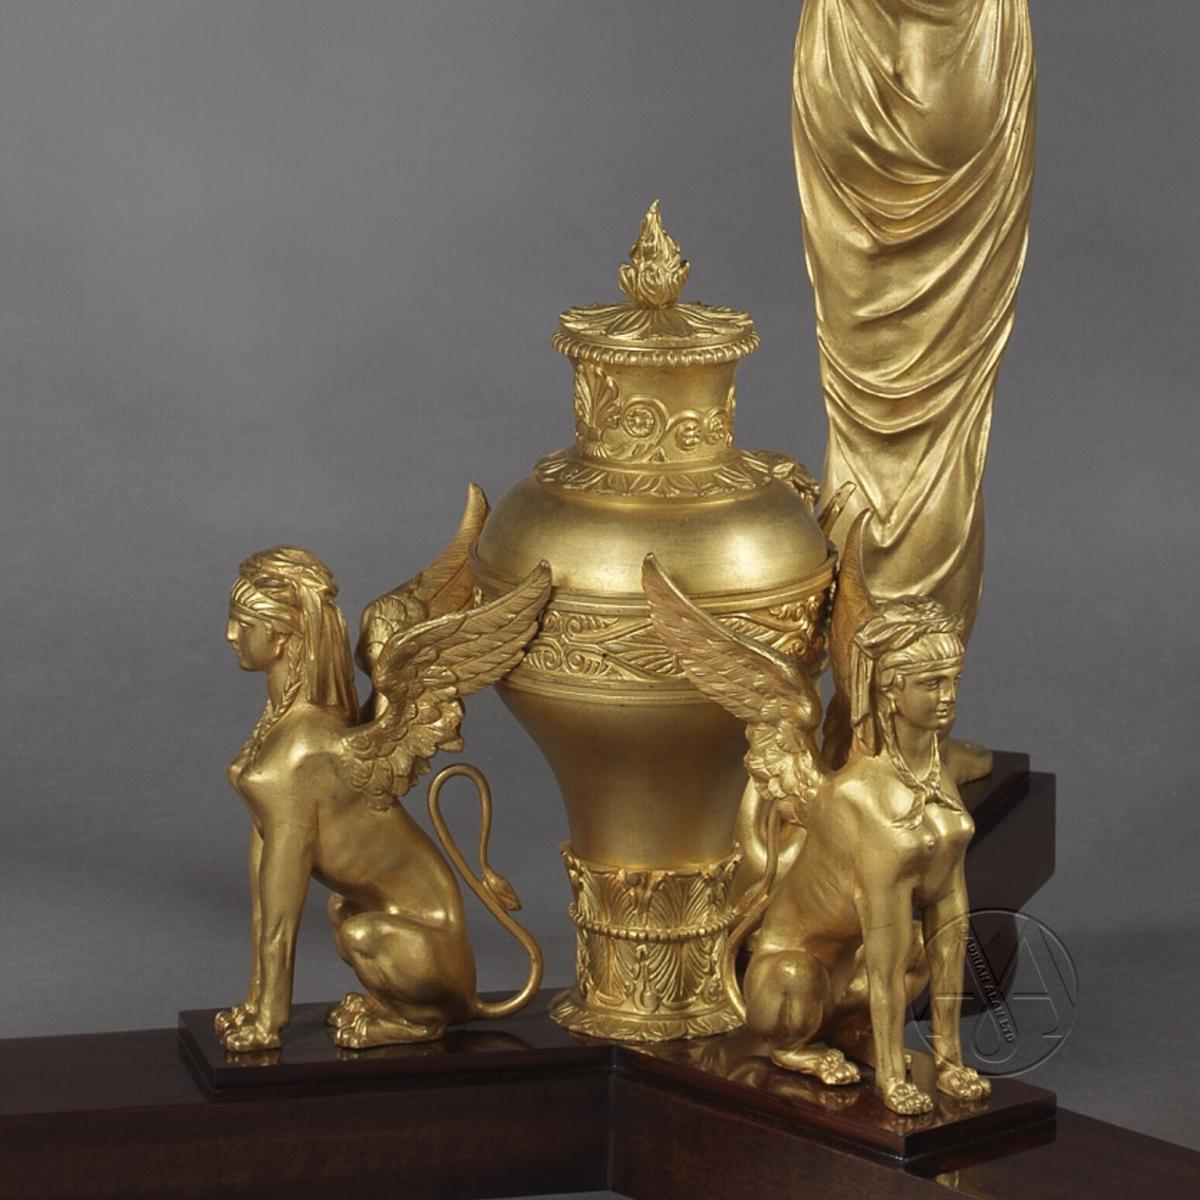 A detail of Fine Empire Style Gilt-Bronze and Mahogany Gueridon In The Manner of Jacob Desmalter